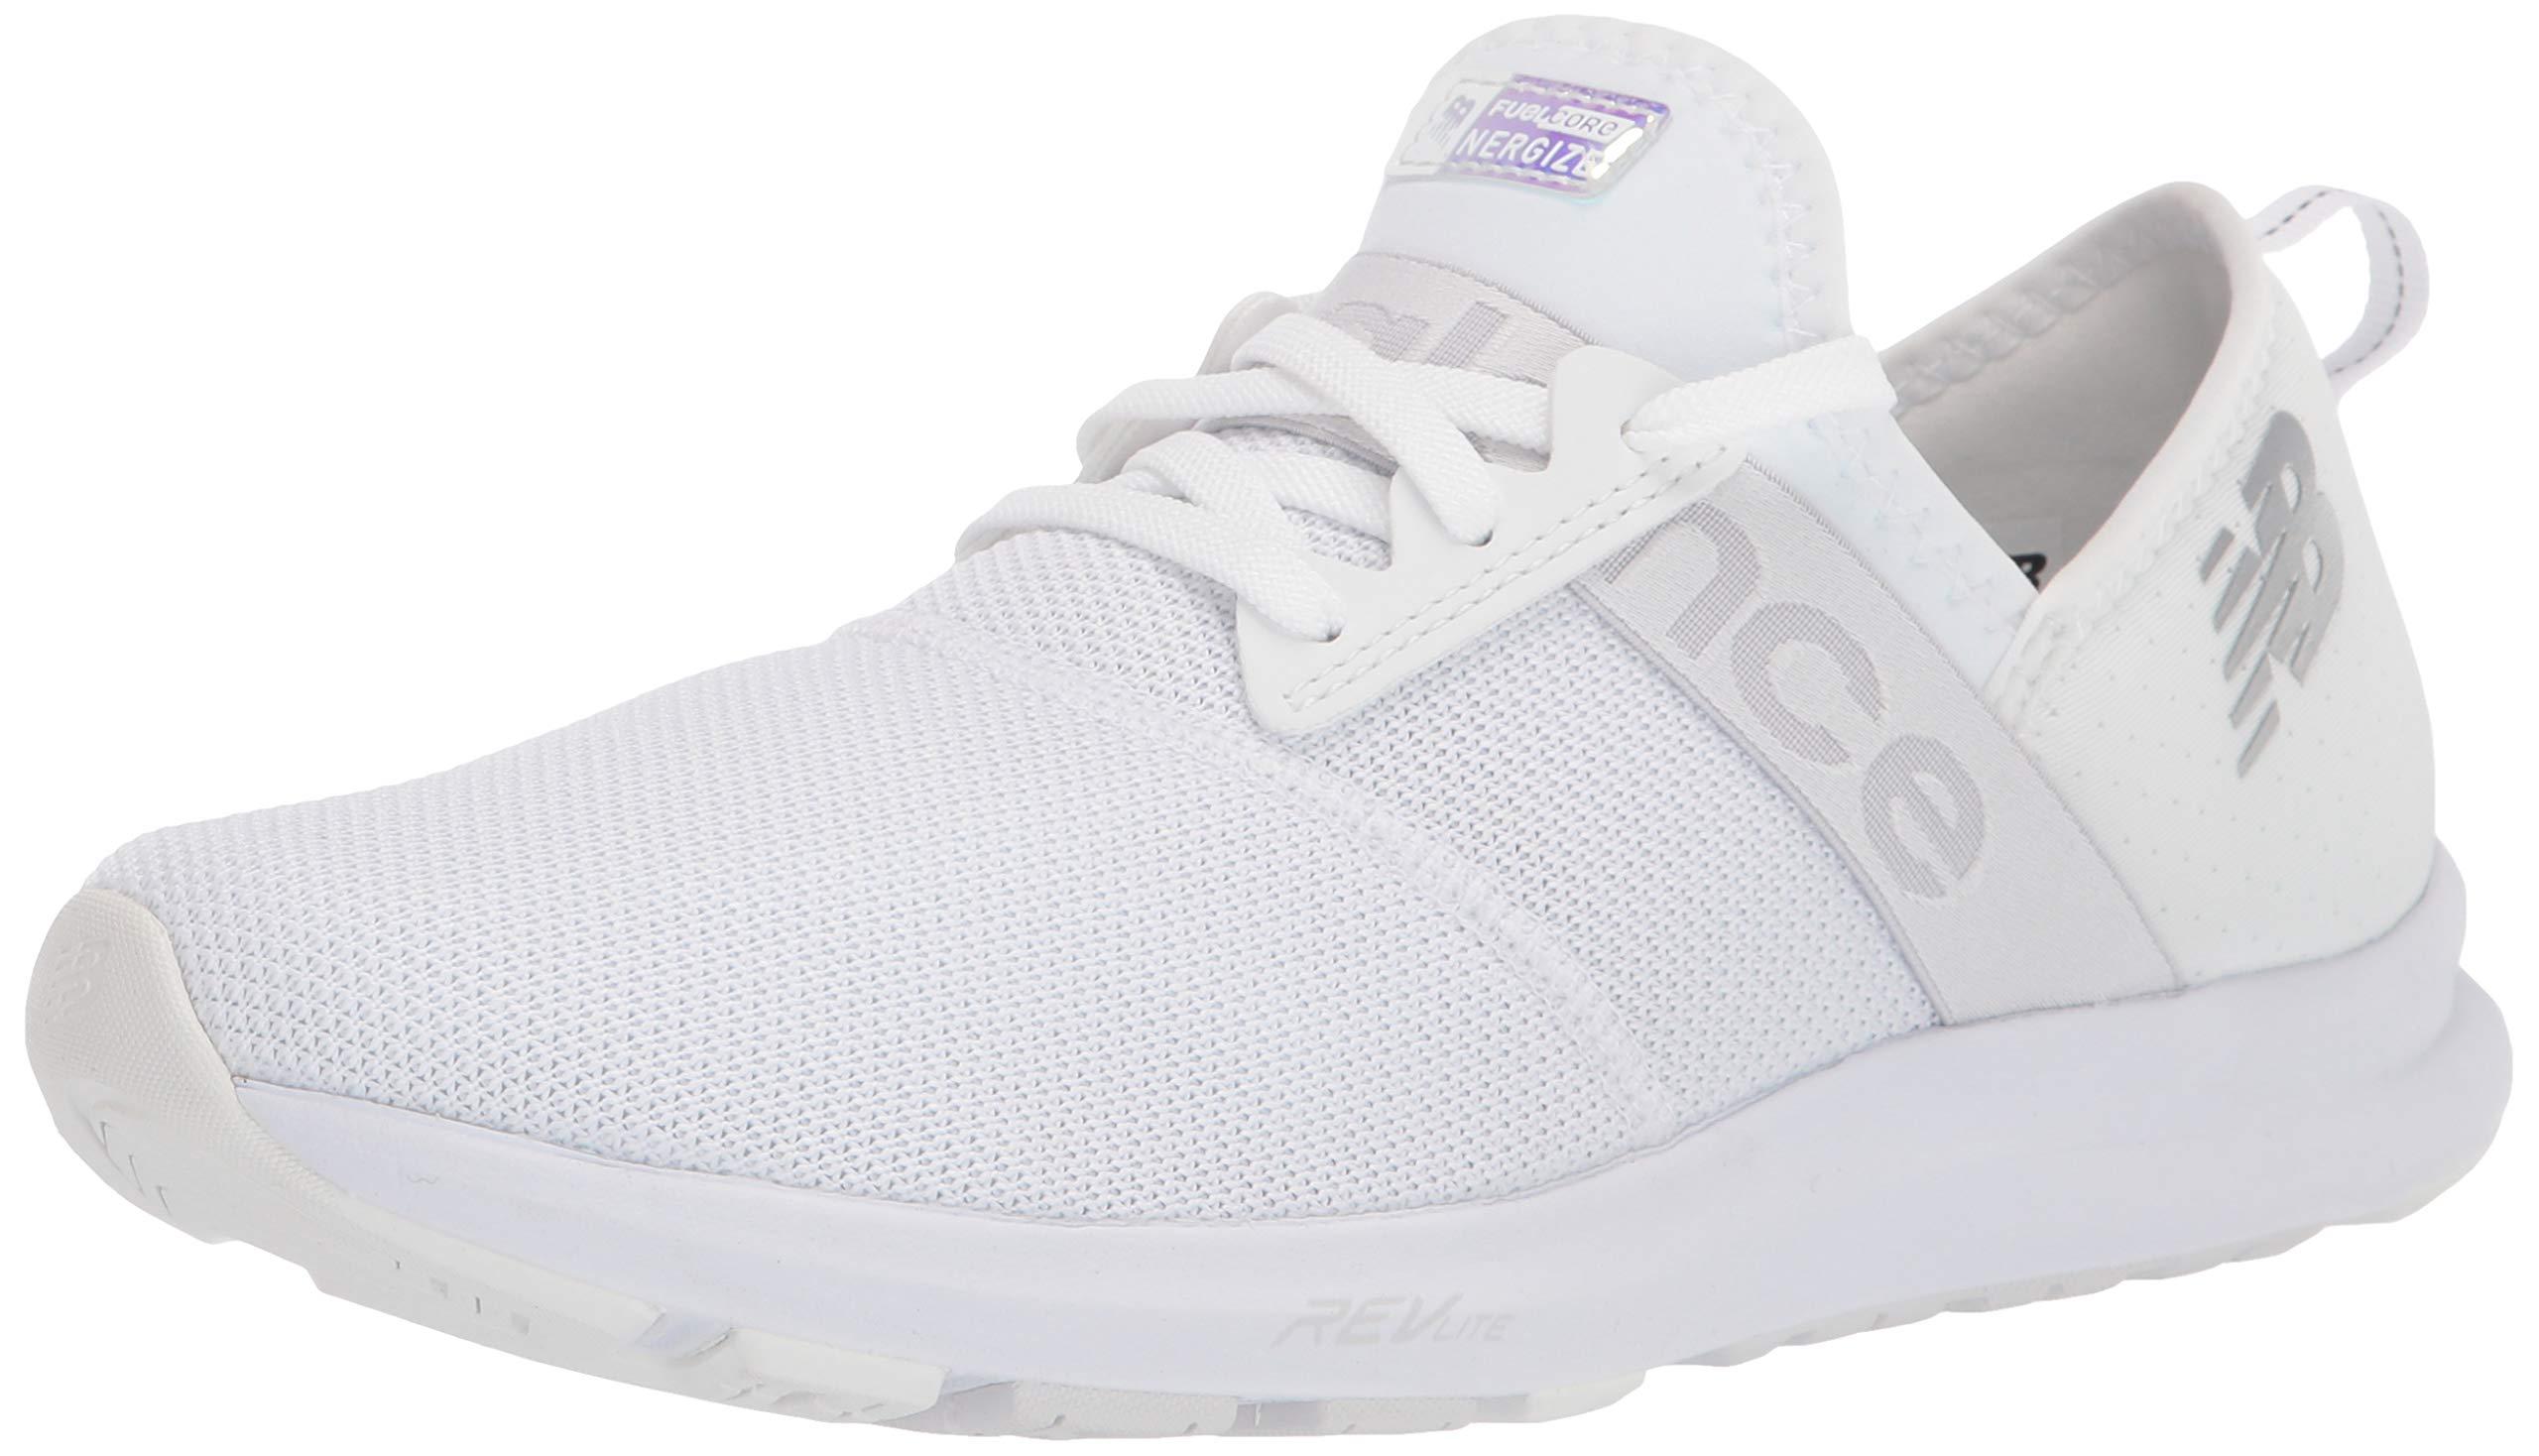 New Balance Nergize V1 Sneaker in White - Save 61% | Lyst